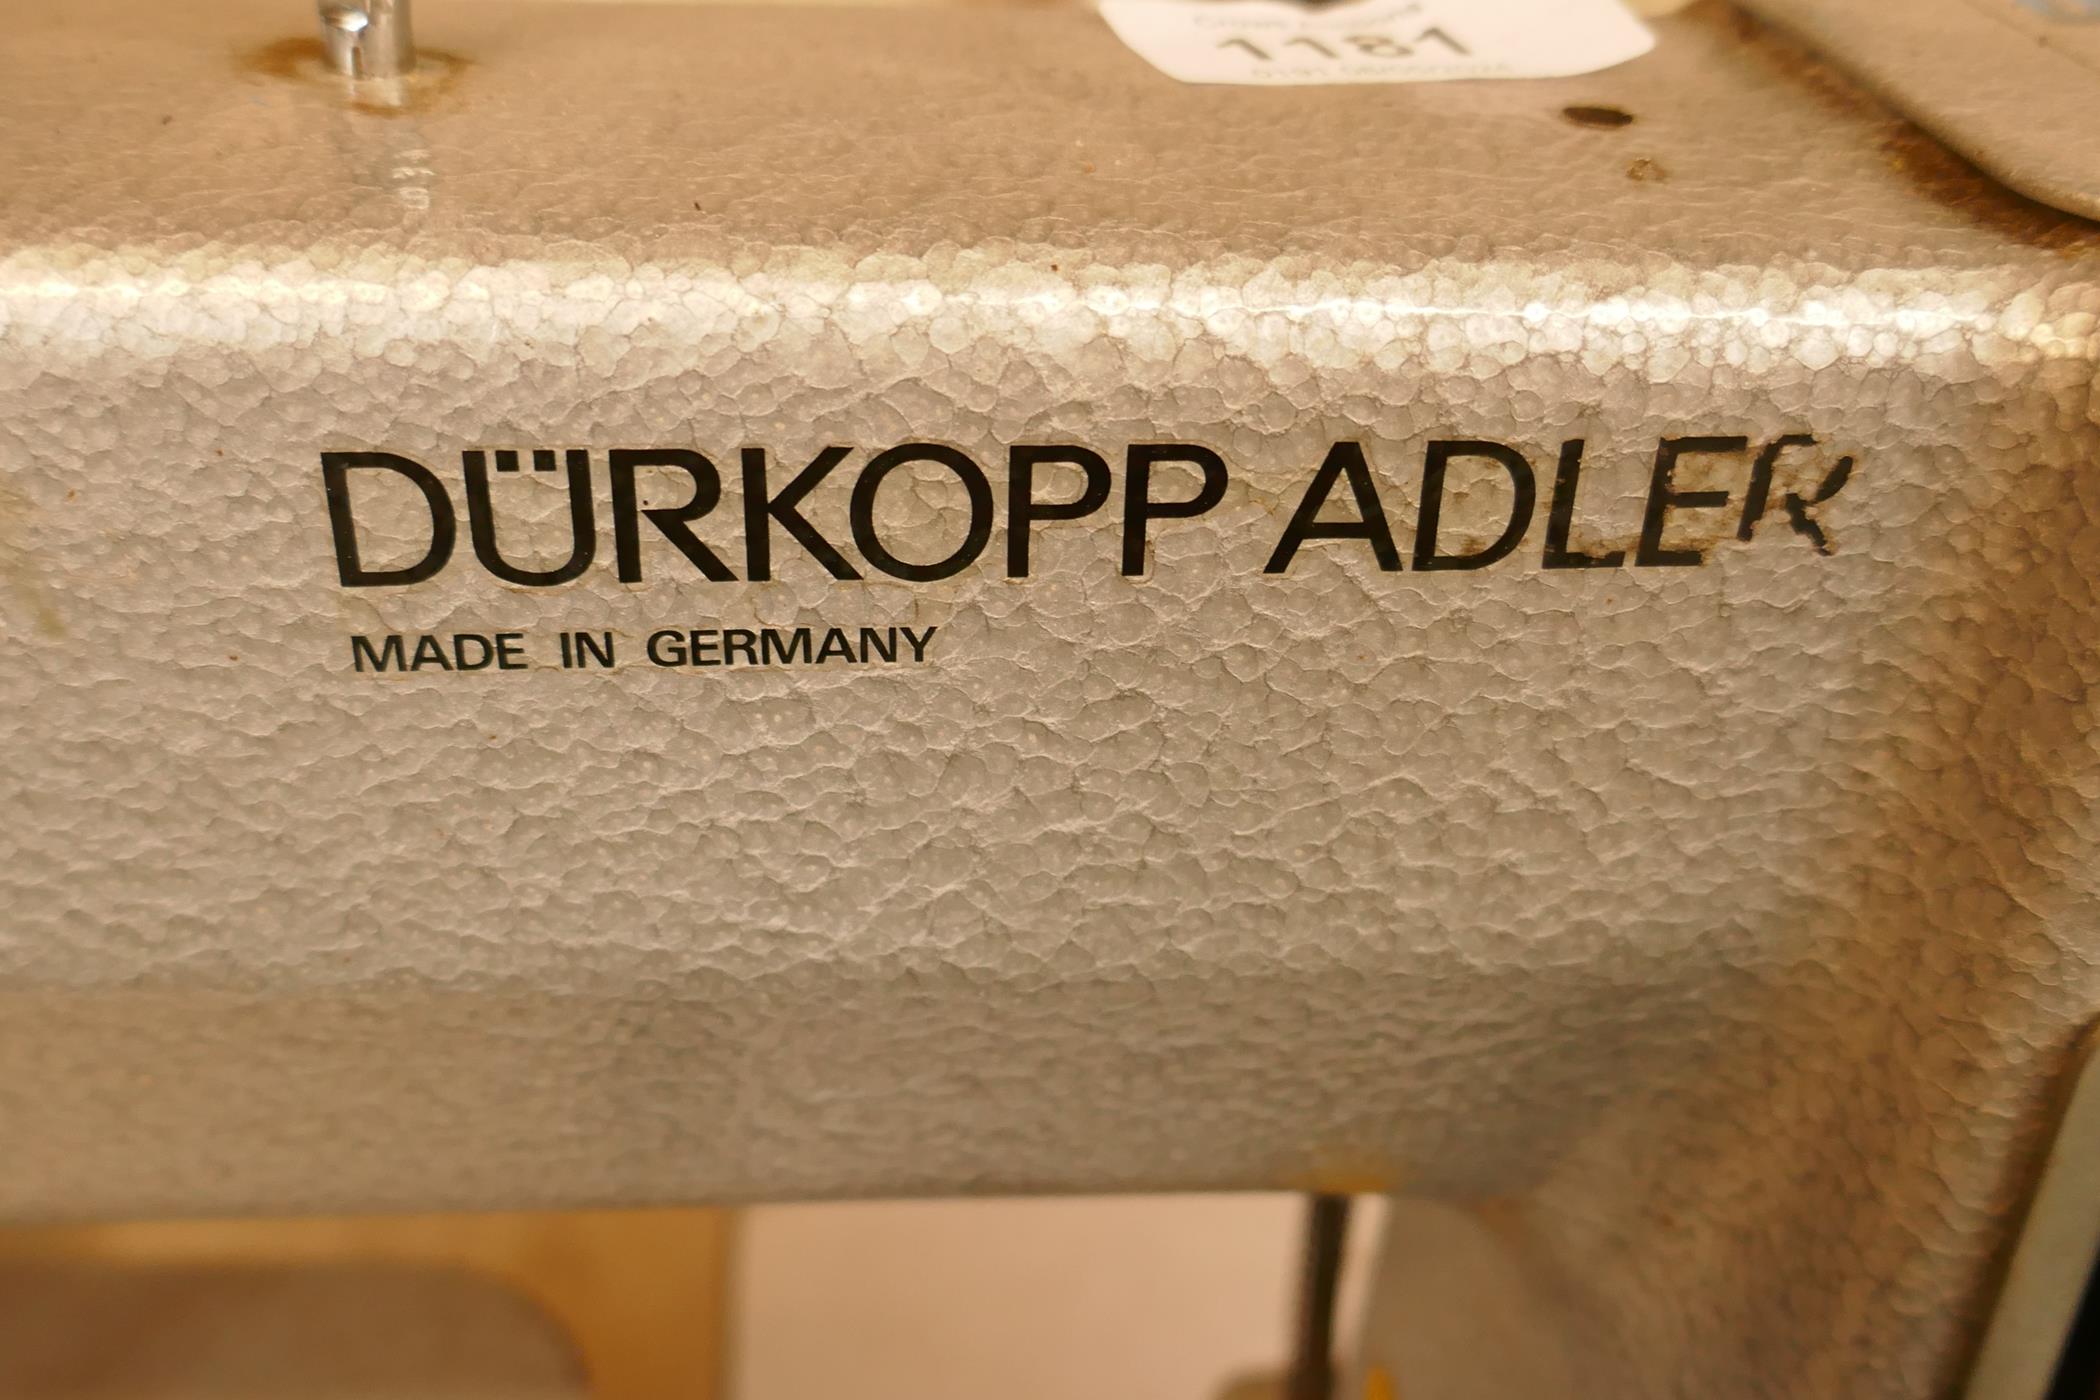 A Durkopp Adler type KO69 industrial sewing machine with bench - Image 2 of 5